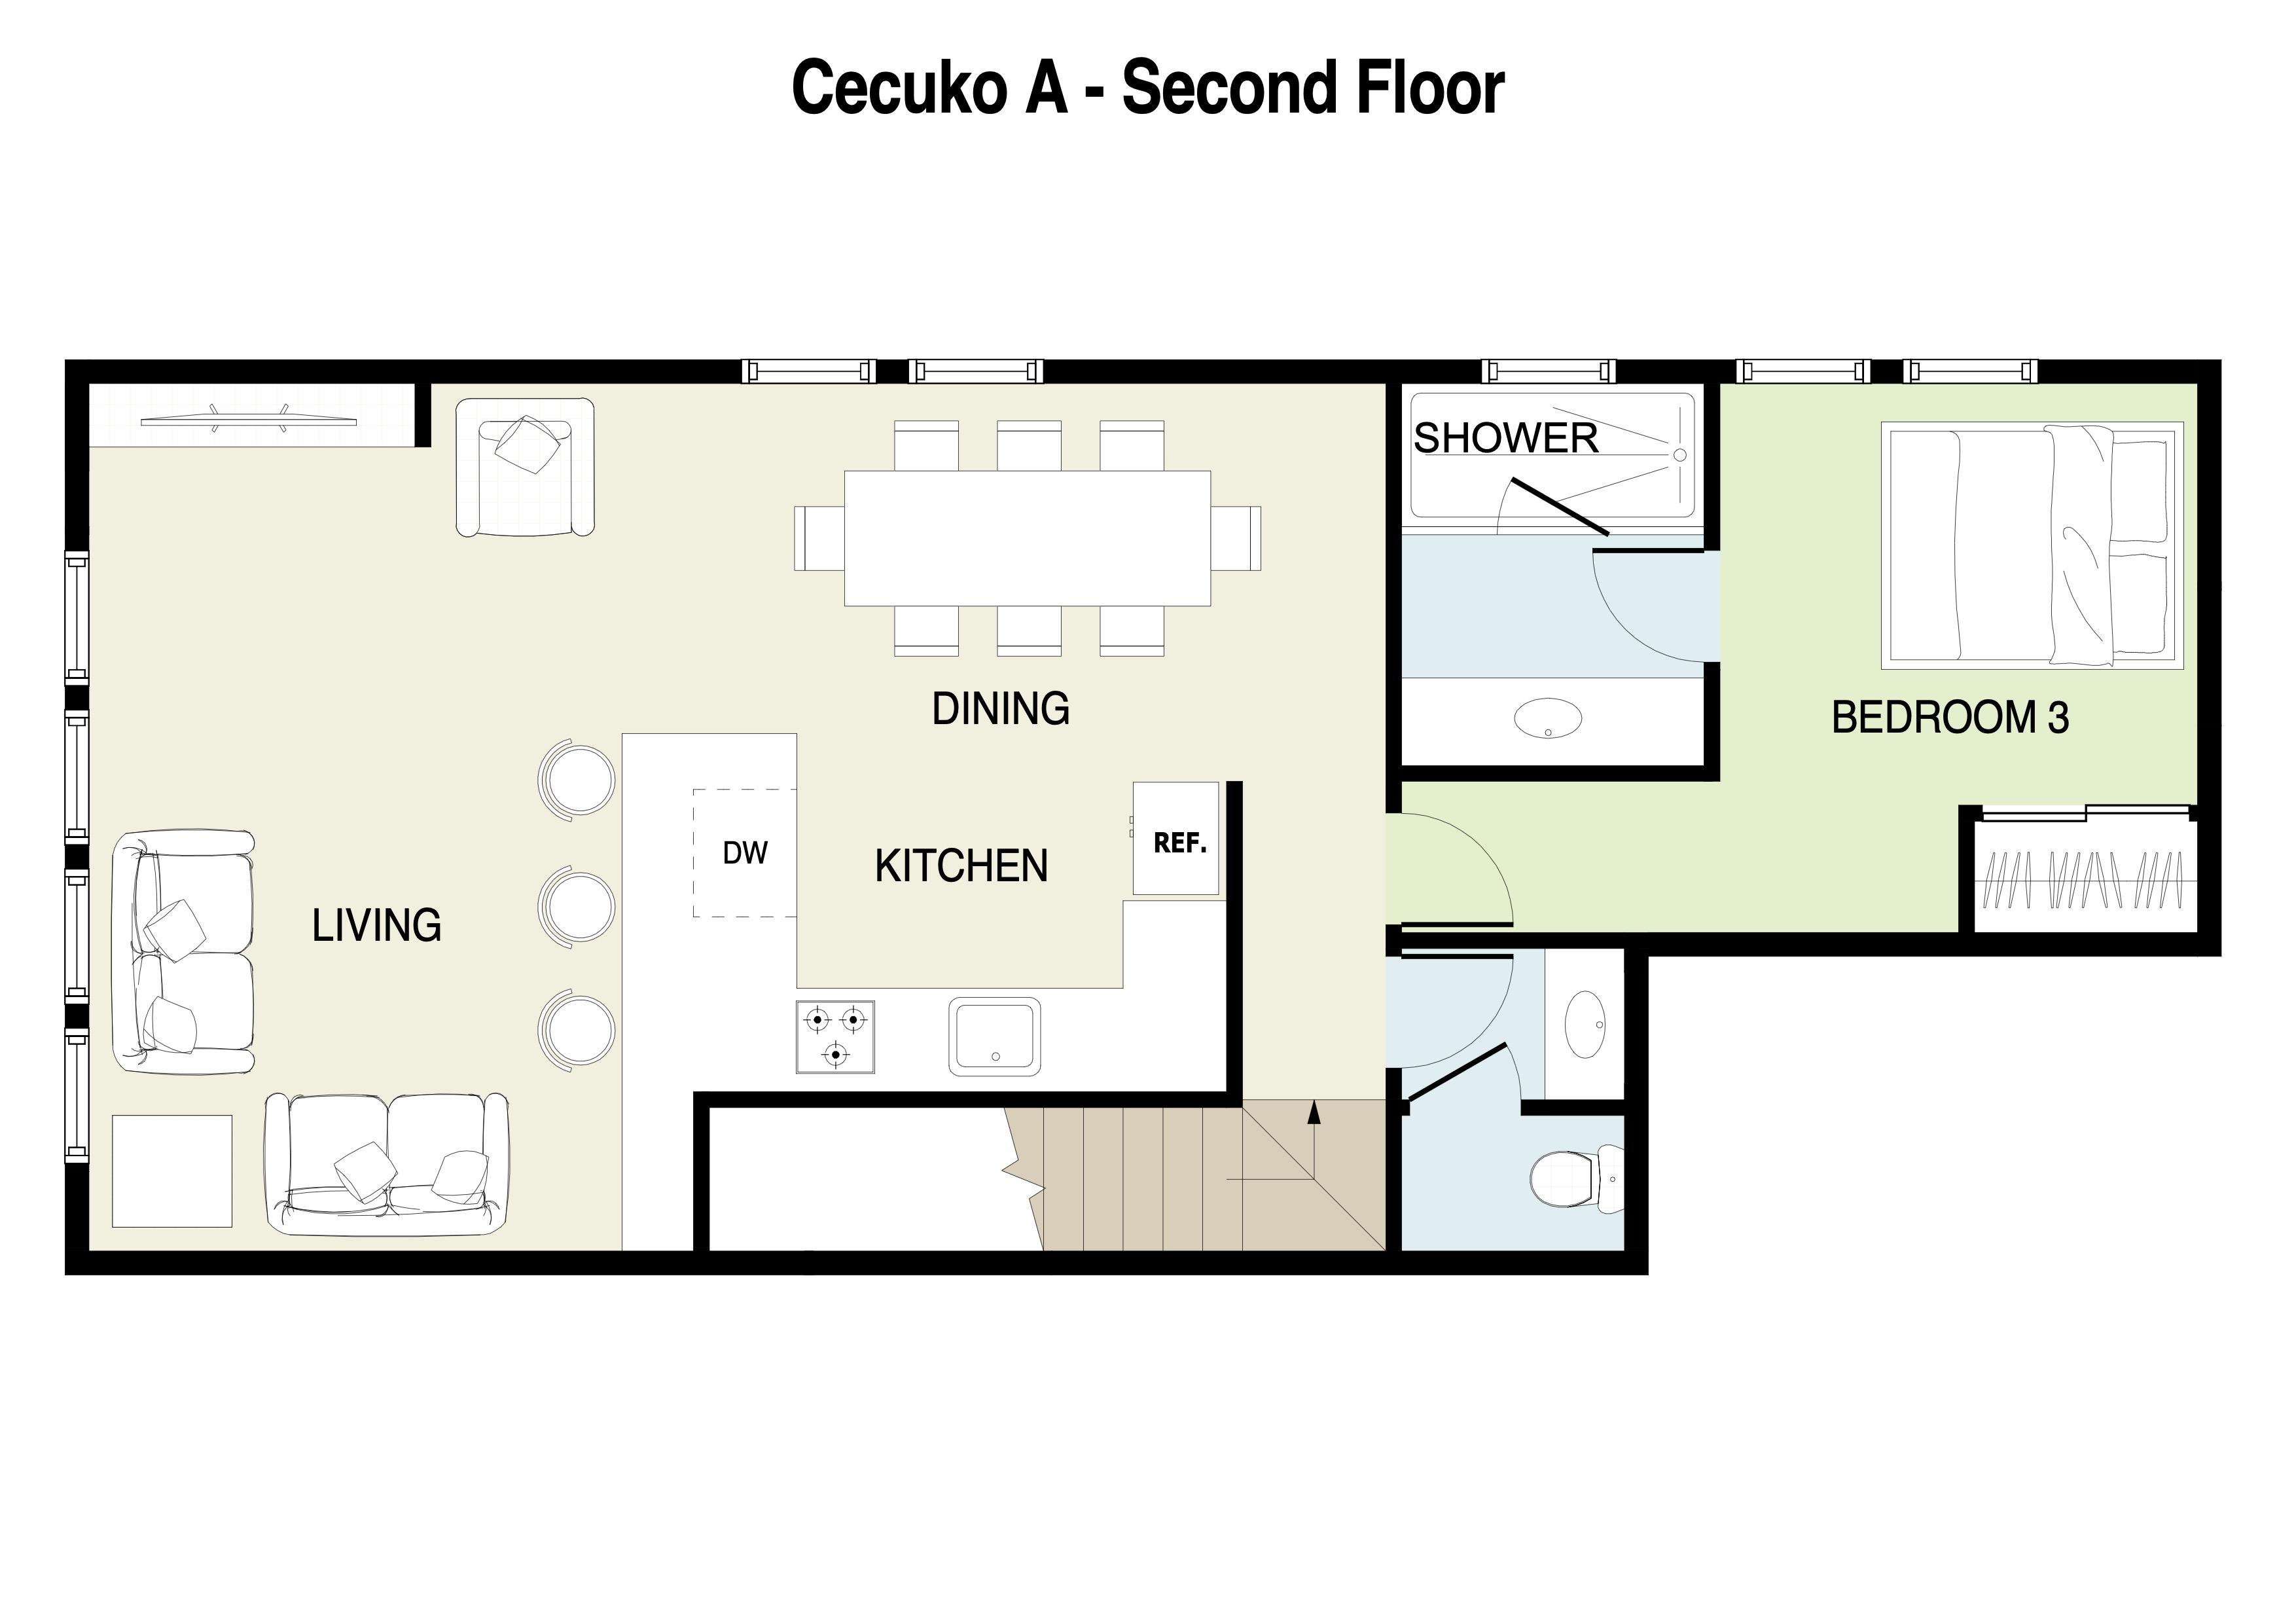 Cecuko A 2nd Floor Plans